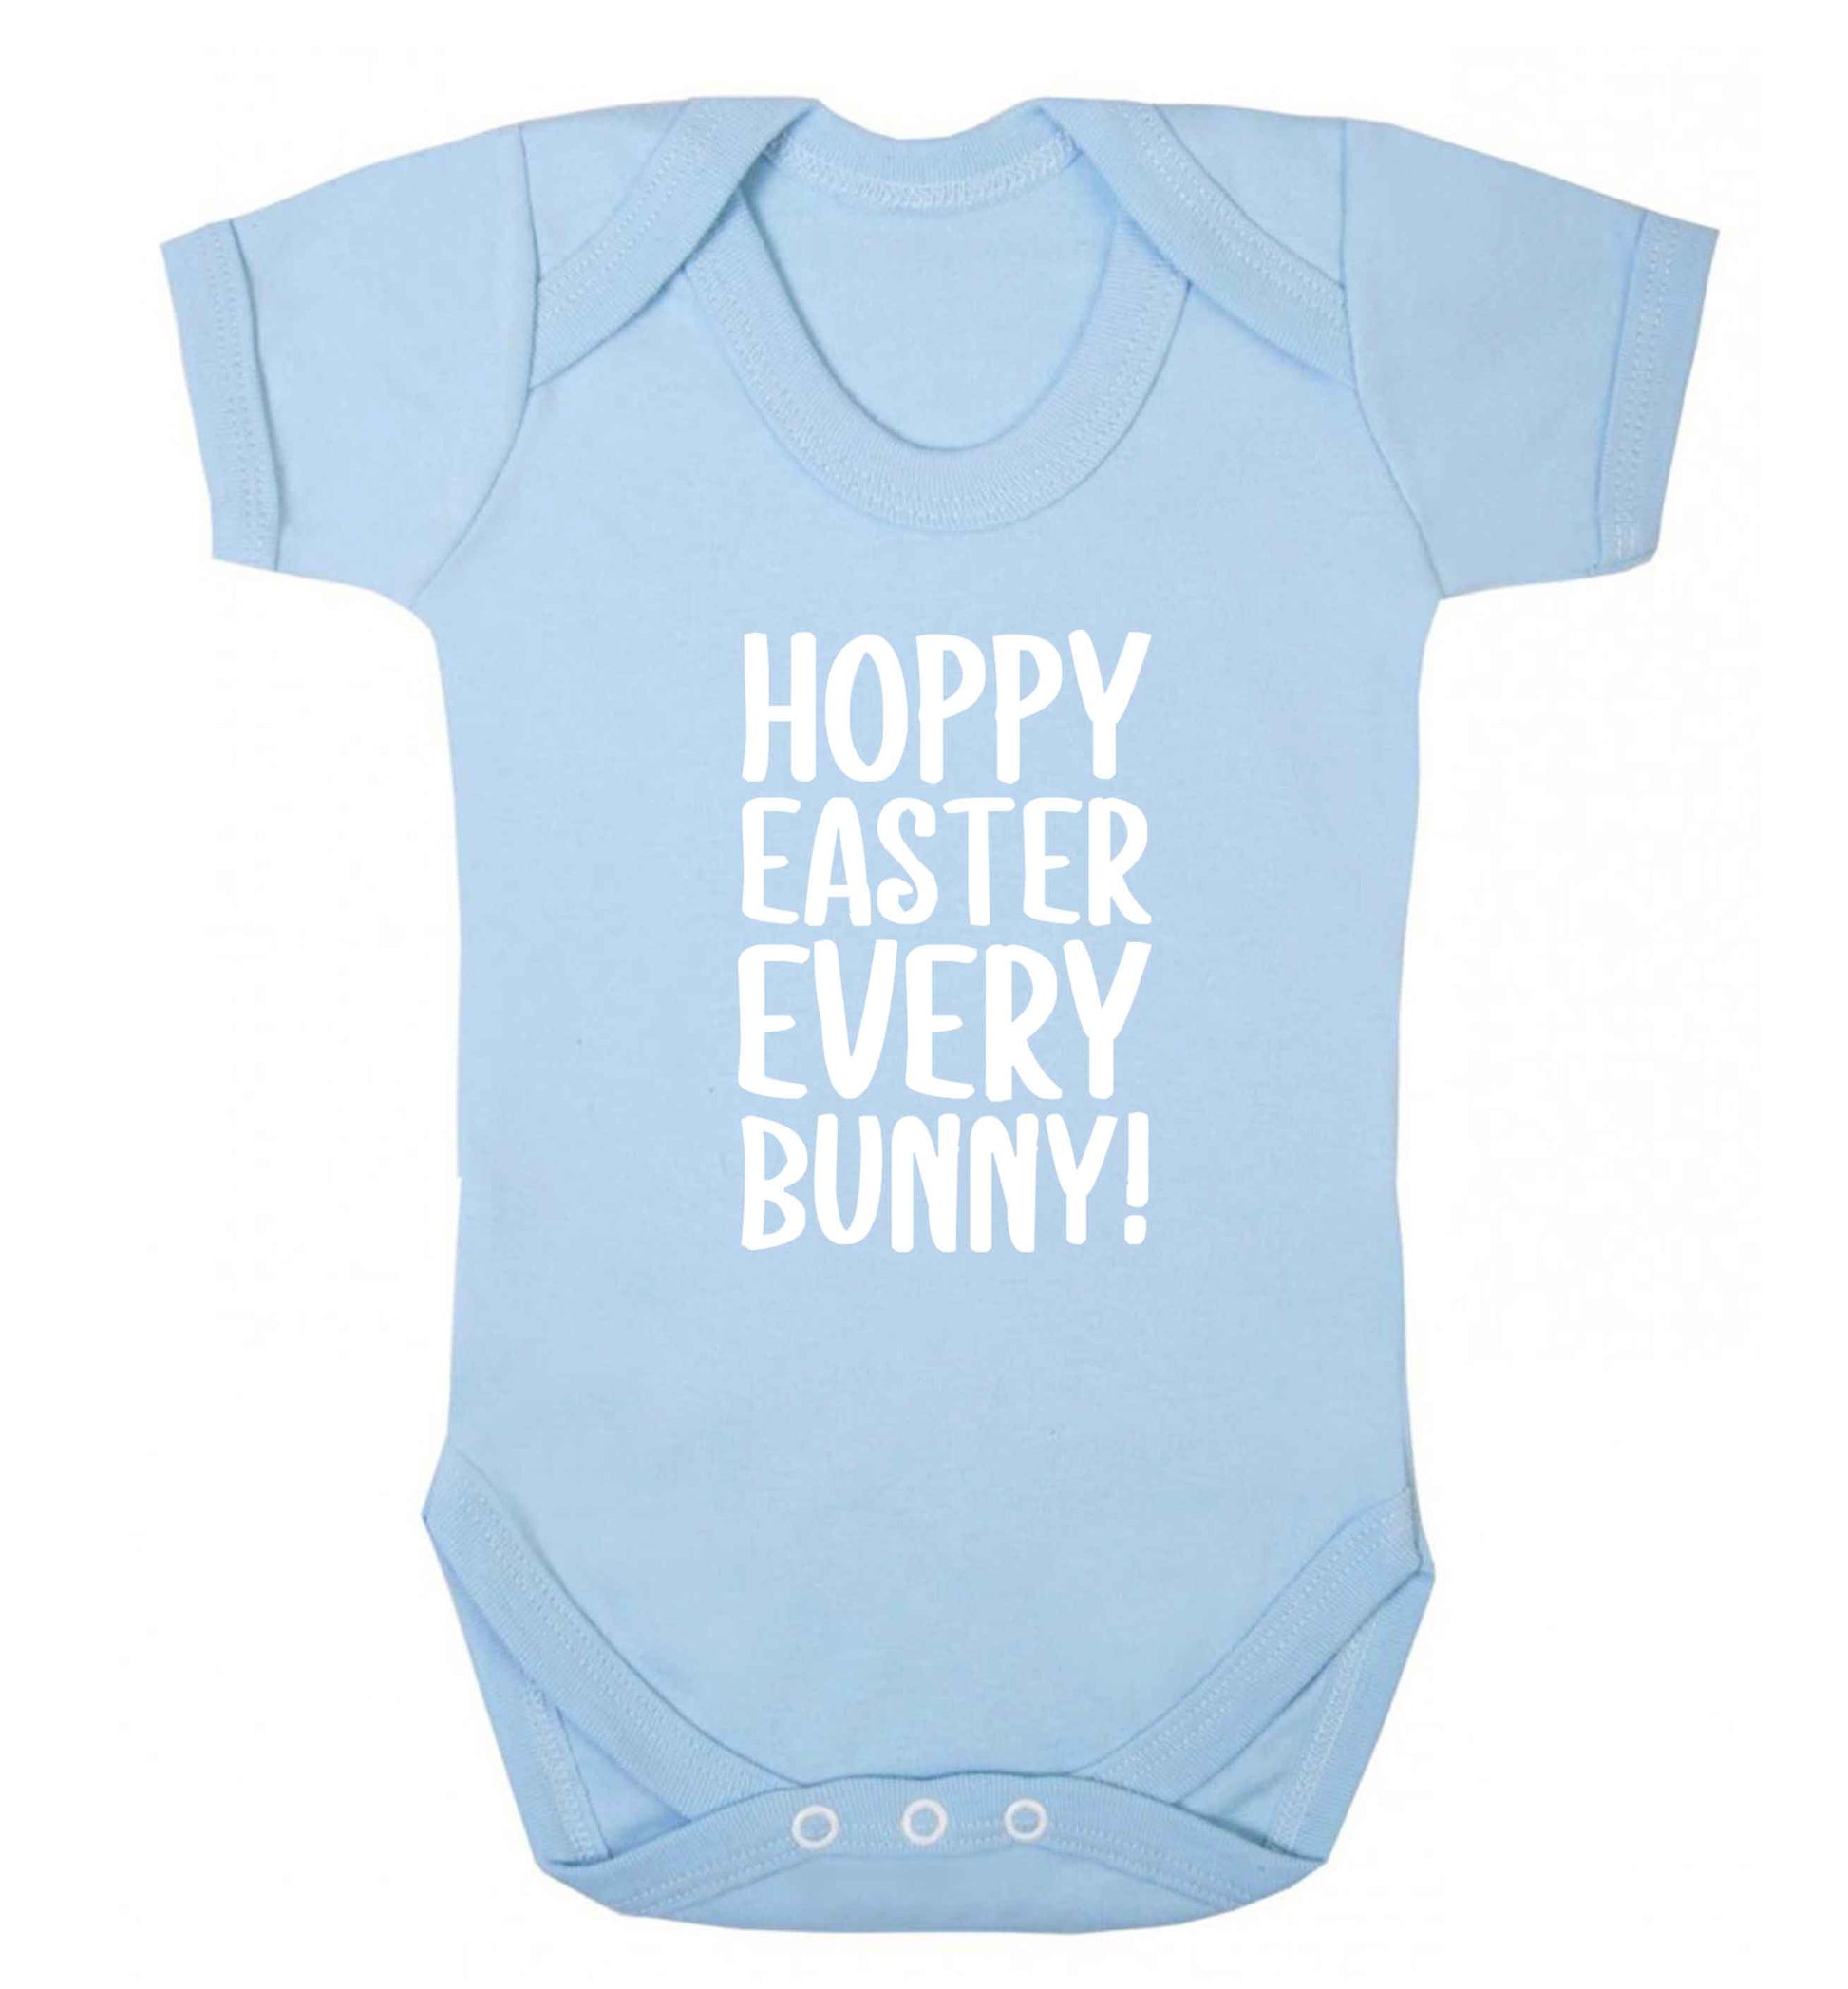 Hoppy Easter every bunny! baby vest pale blue 18-24 months